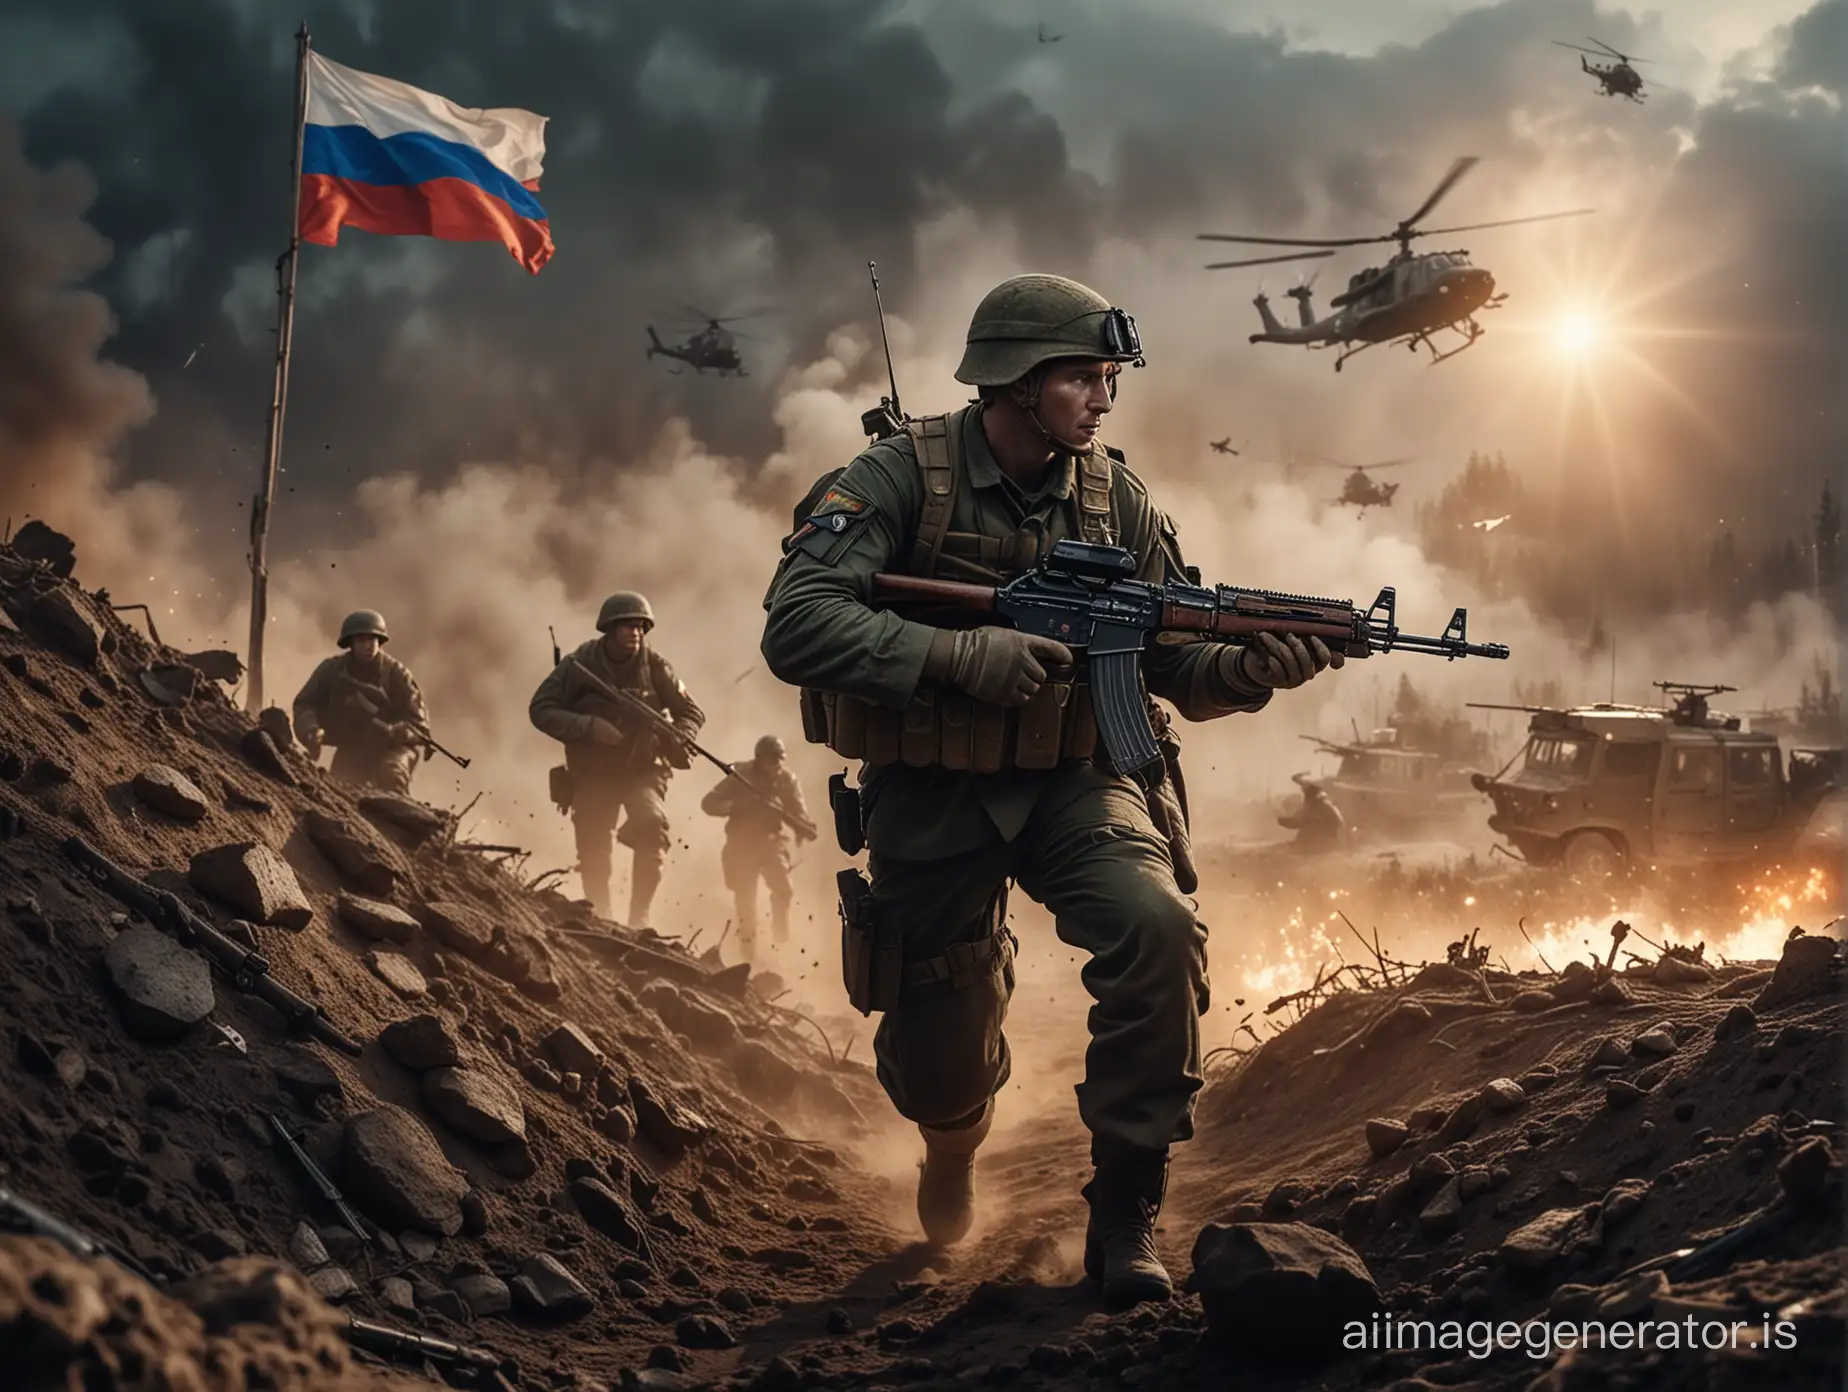 photo of a fully equipped modern Russian army soldier with AK rifle on the attack in trenches, two helicopters inbound, Russian flag floating behind, bright lighting, military art, 4K resolution, shot on Leica M10, painterly style, dynamic composition, left-behind view